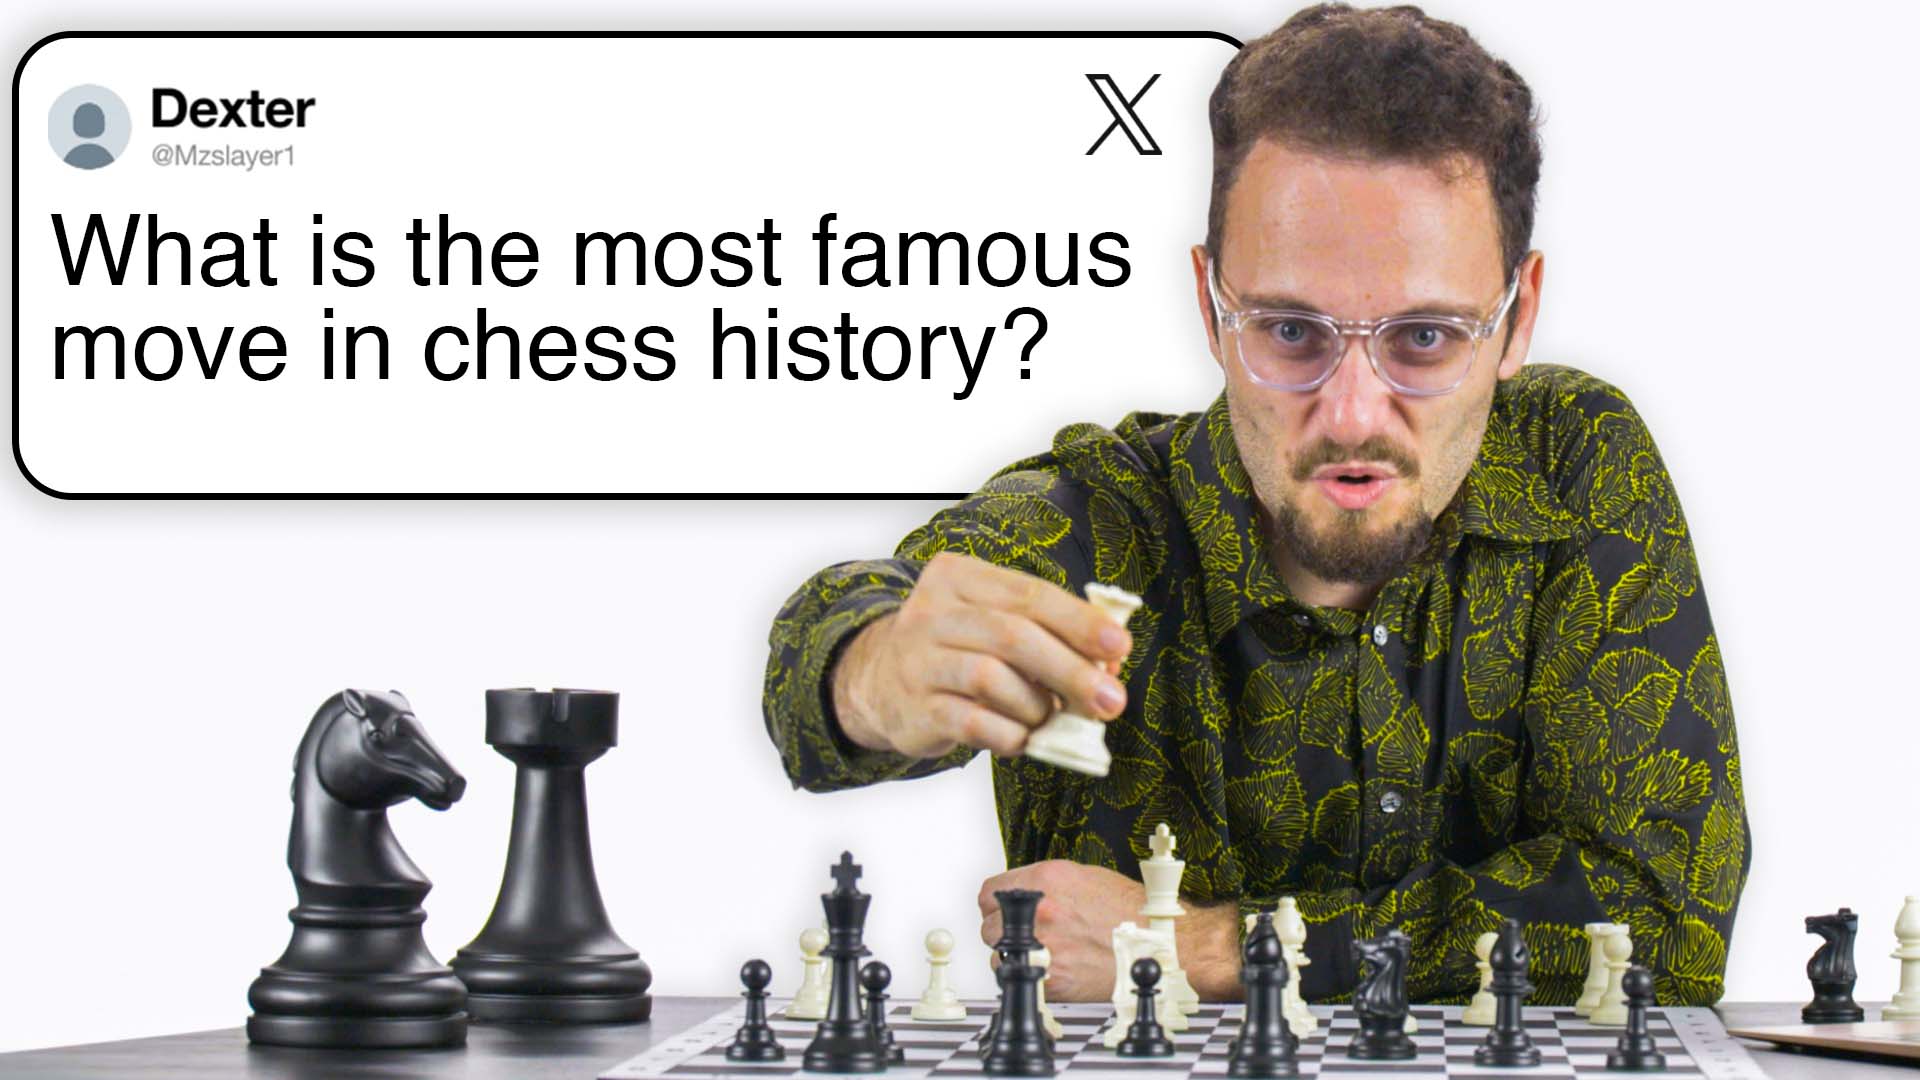 Watch Chess Pro Answers More Questions From Twitter, Tech Support